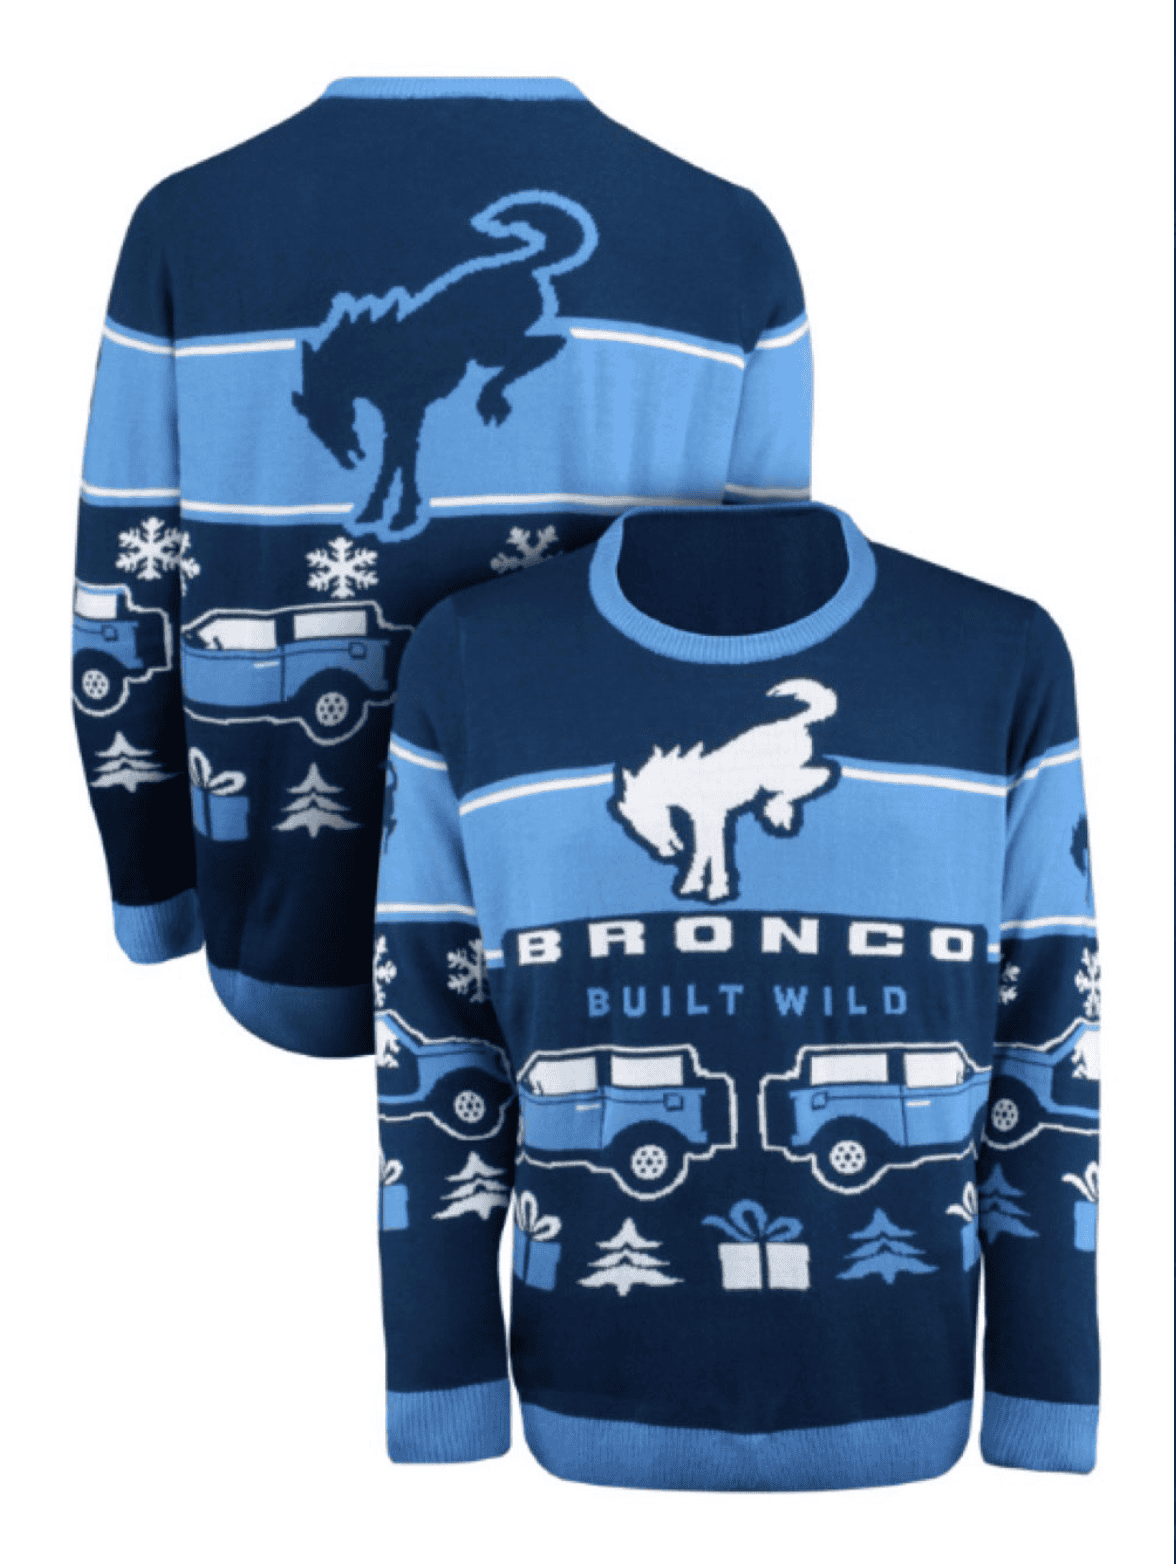 Ford Bronco The Holiday Bronco Sweater Is Here! Screen Shot 2020-10-21 at 11.54.01 AM